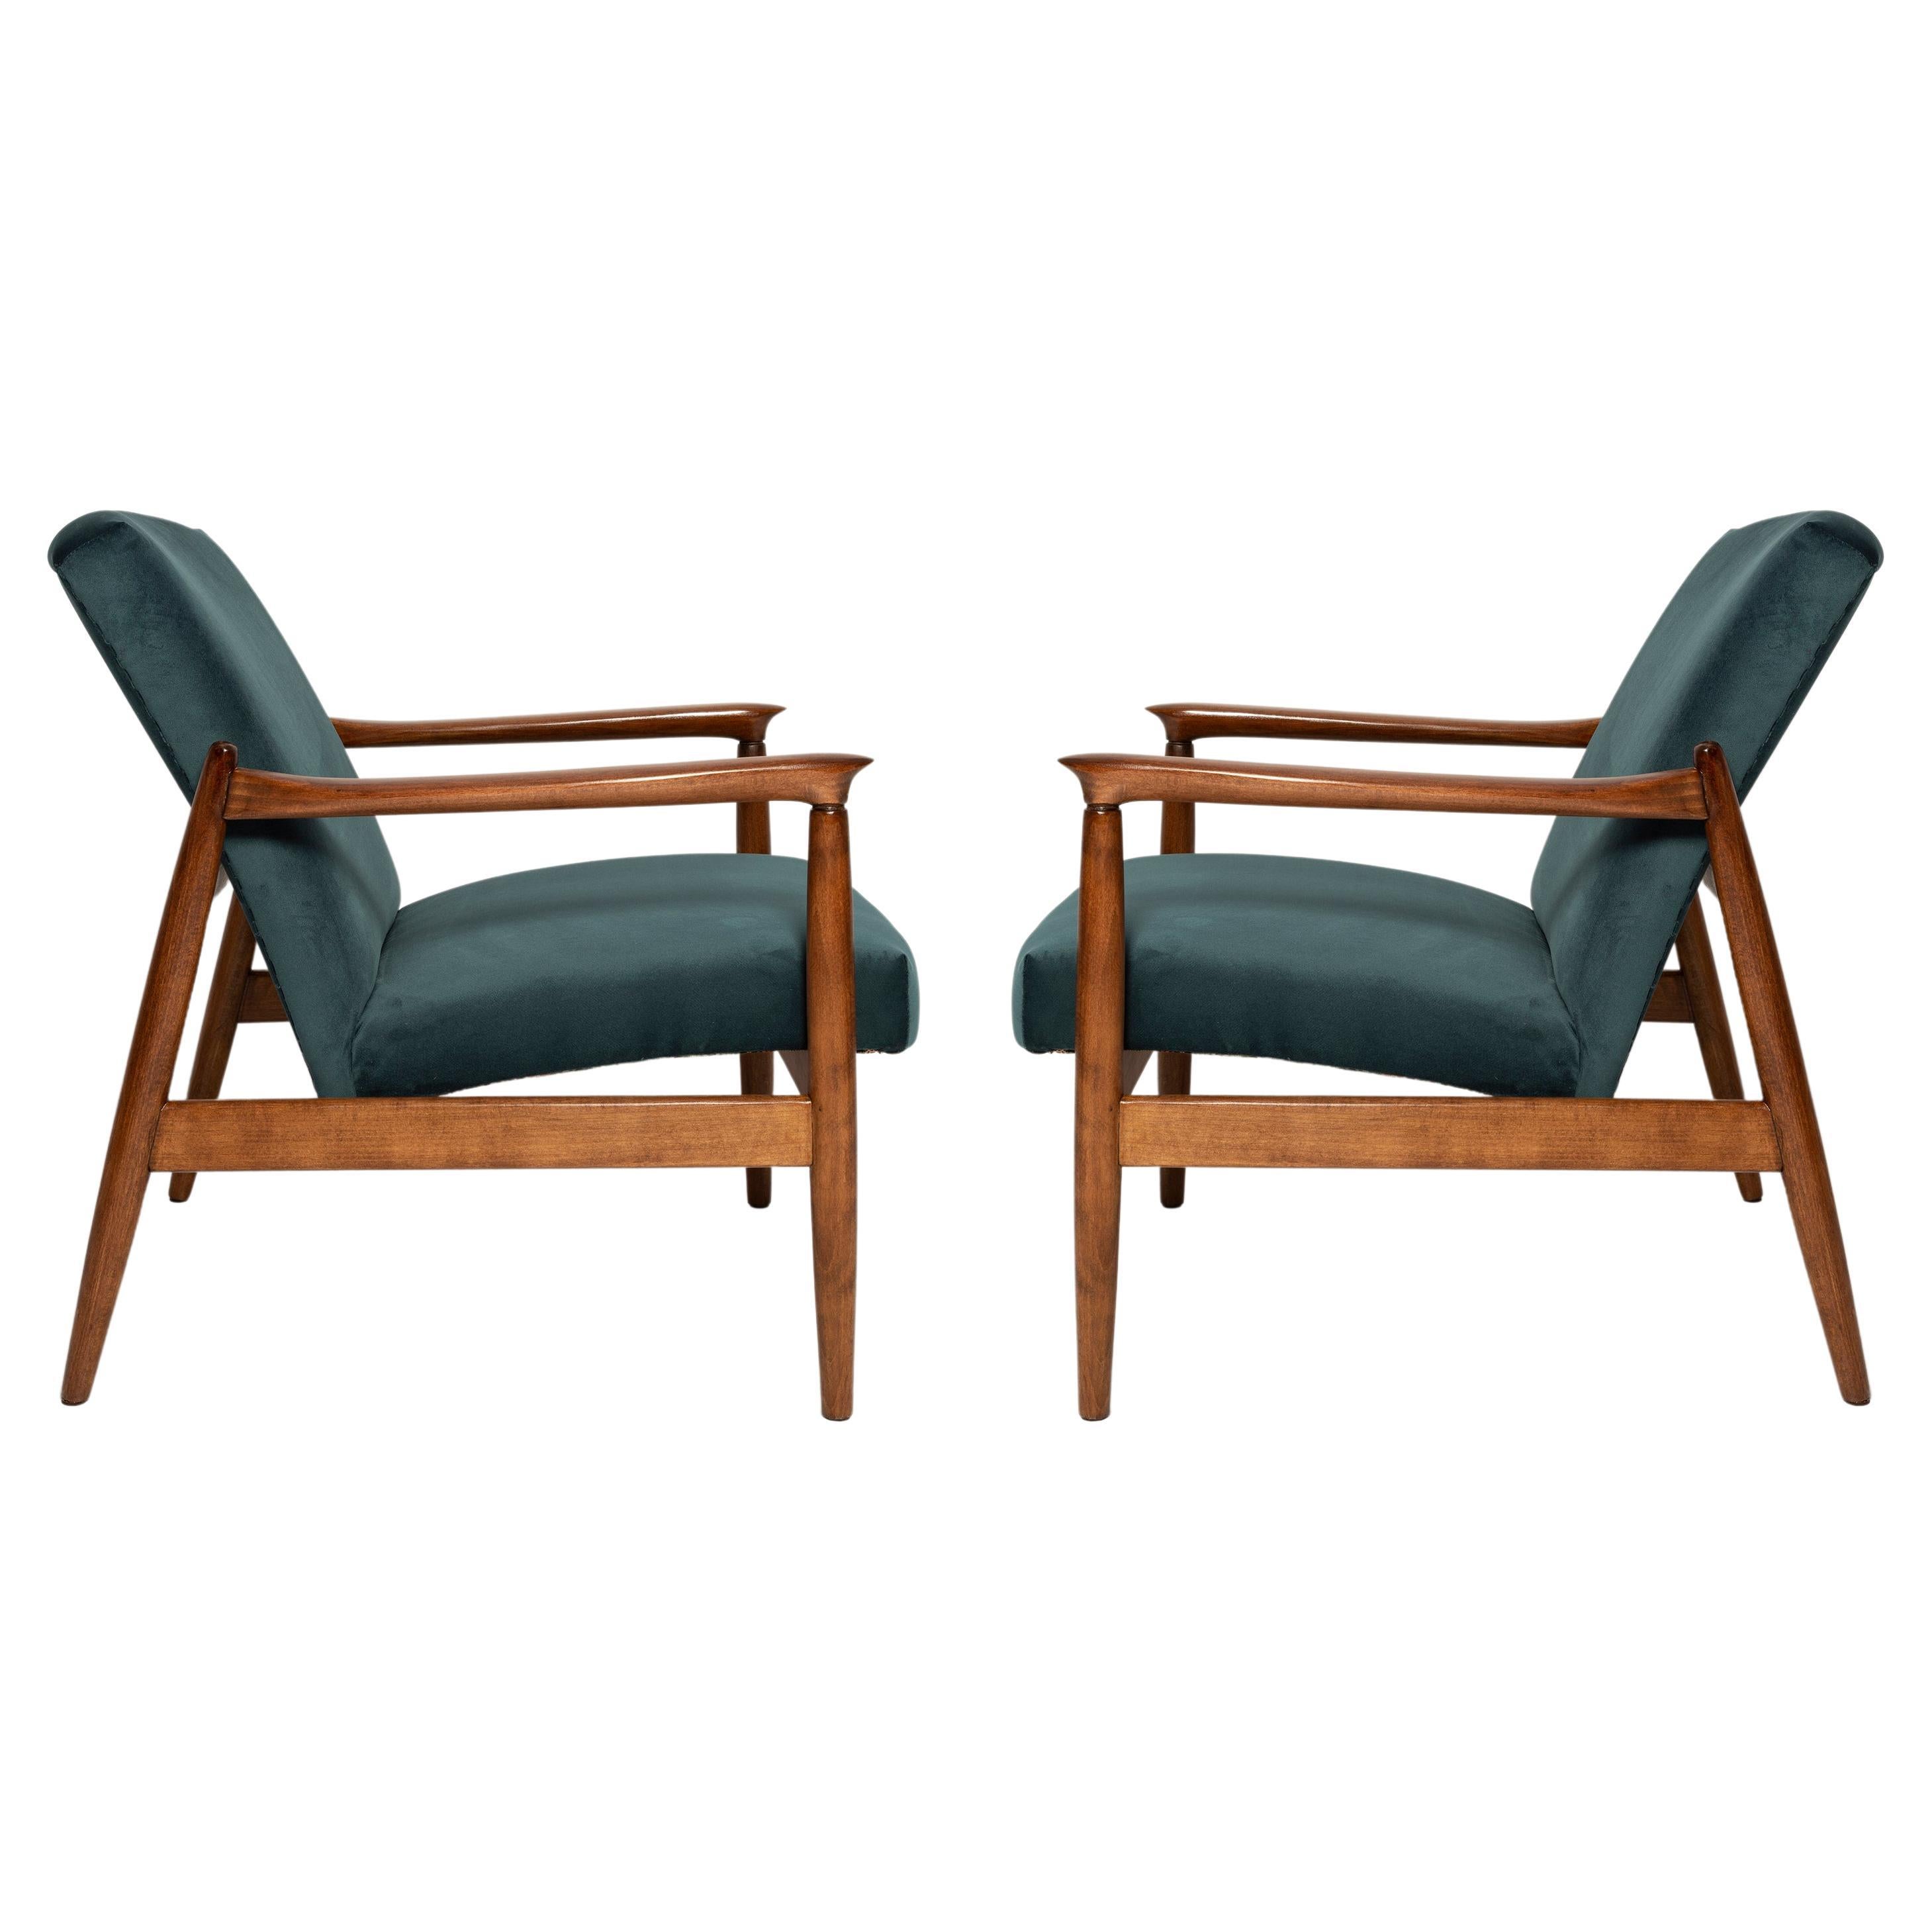 Pair of Midcentury Petrol Blue Armchairs, Edmund Homa, Poland, 1960s For Sale